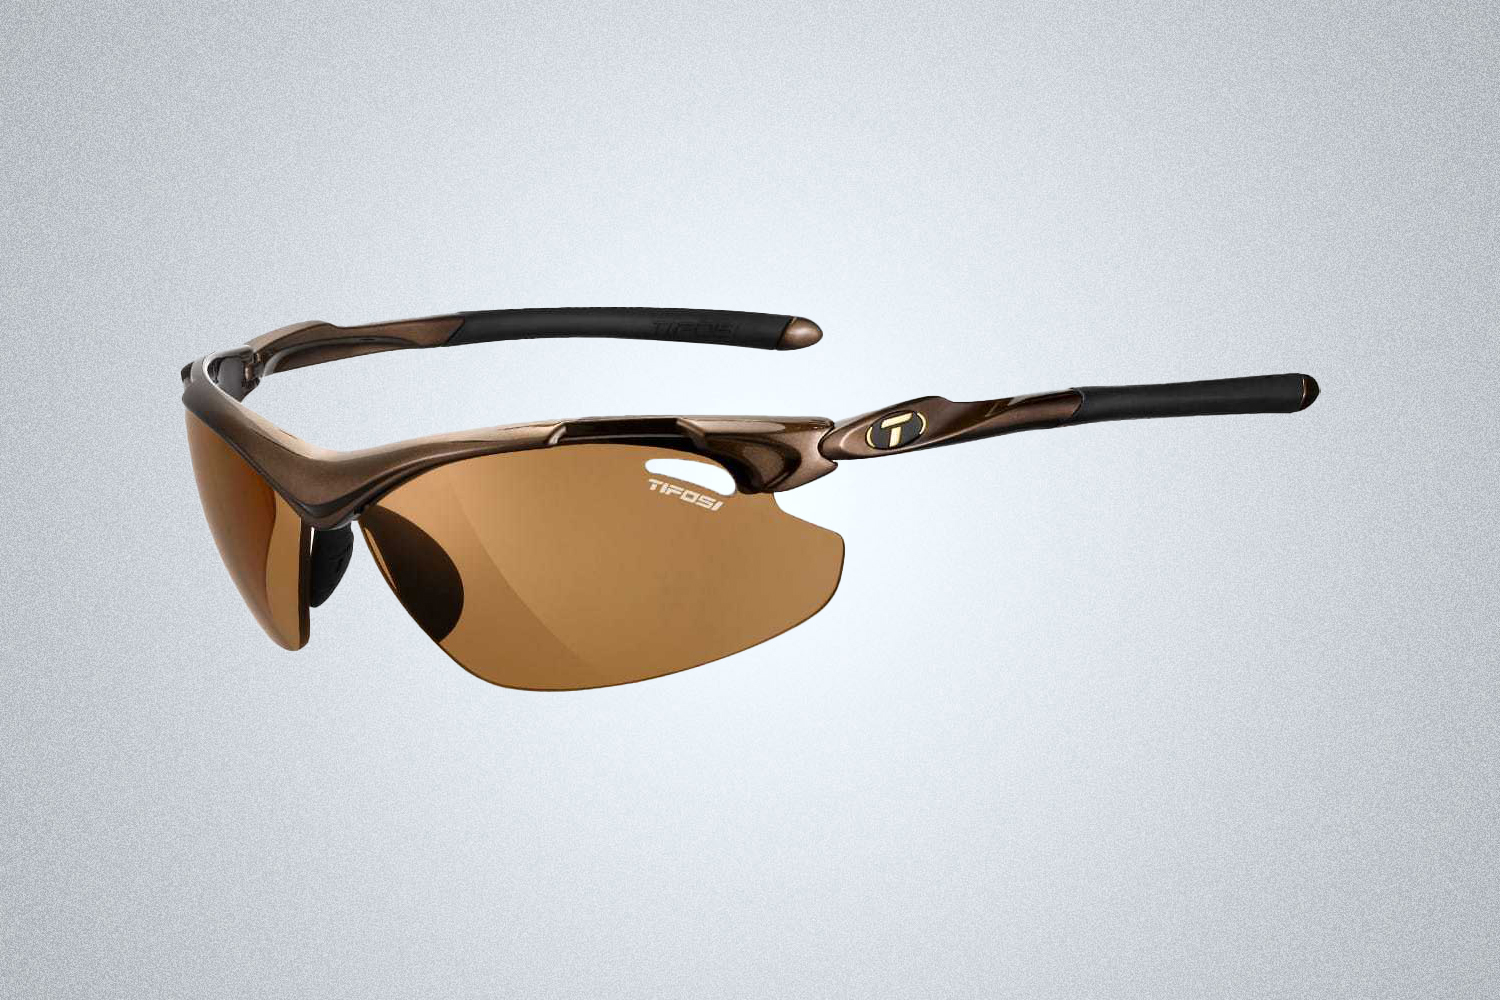 The Tifosi Tyrant 2 is a great pair of sunglasses for fly fishing in 2022